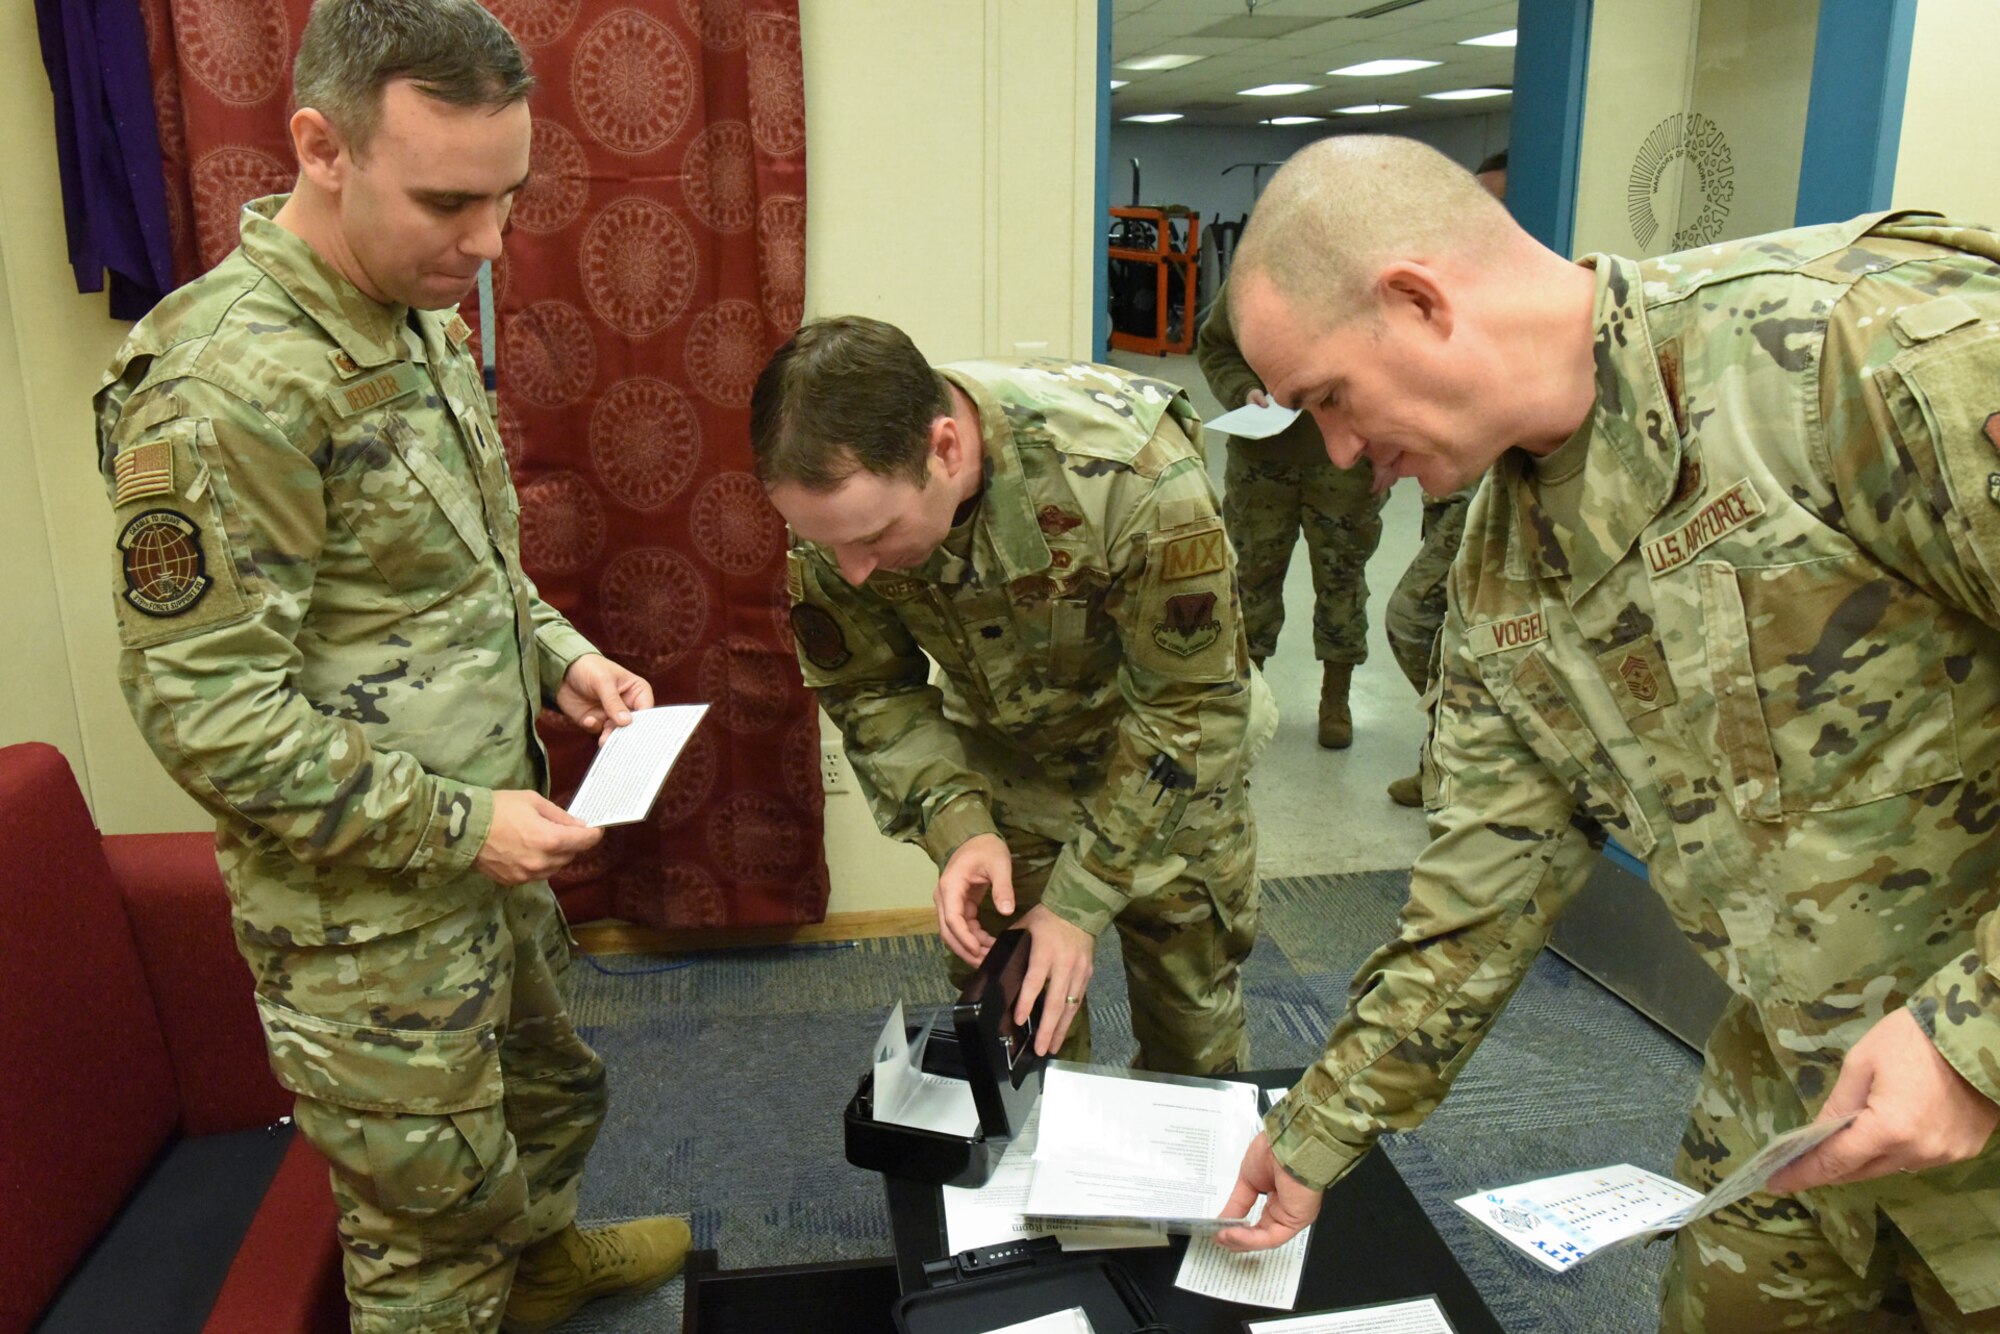 Airmen leaders discover clues in a discovery room.